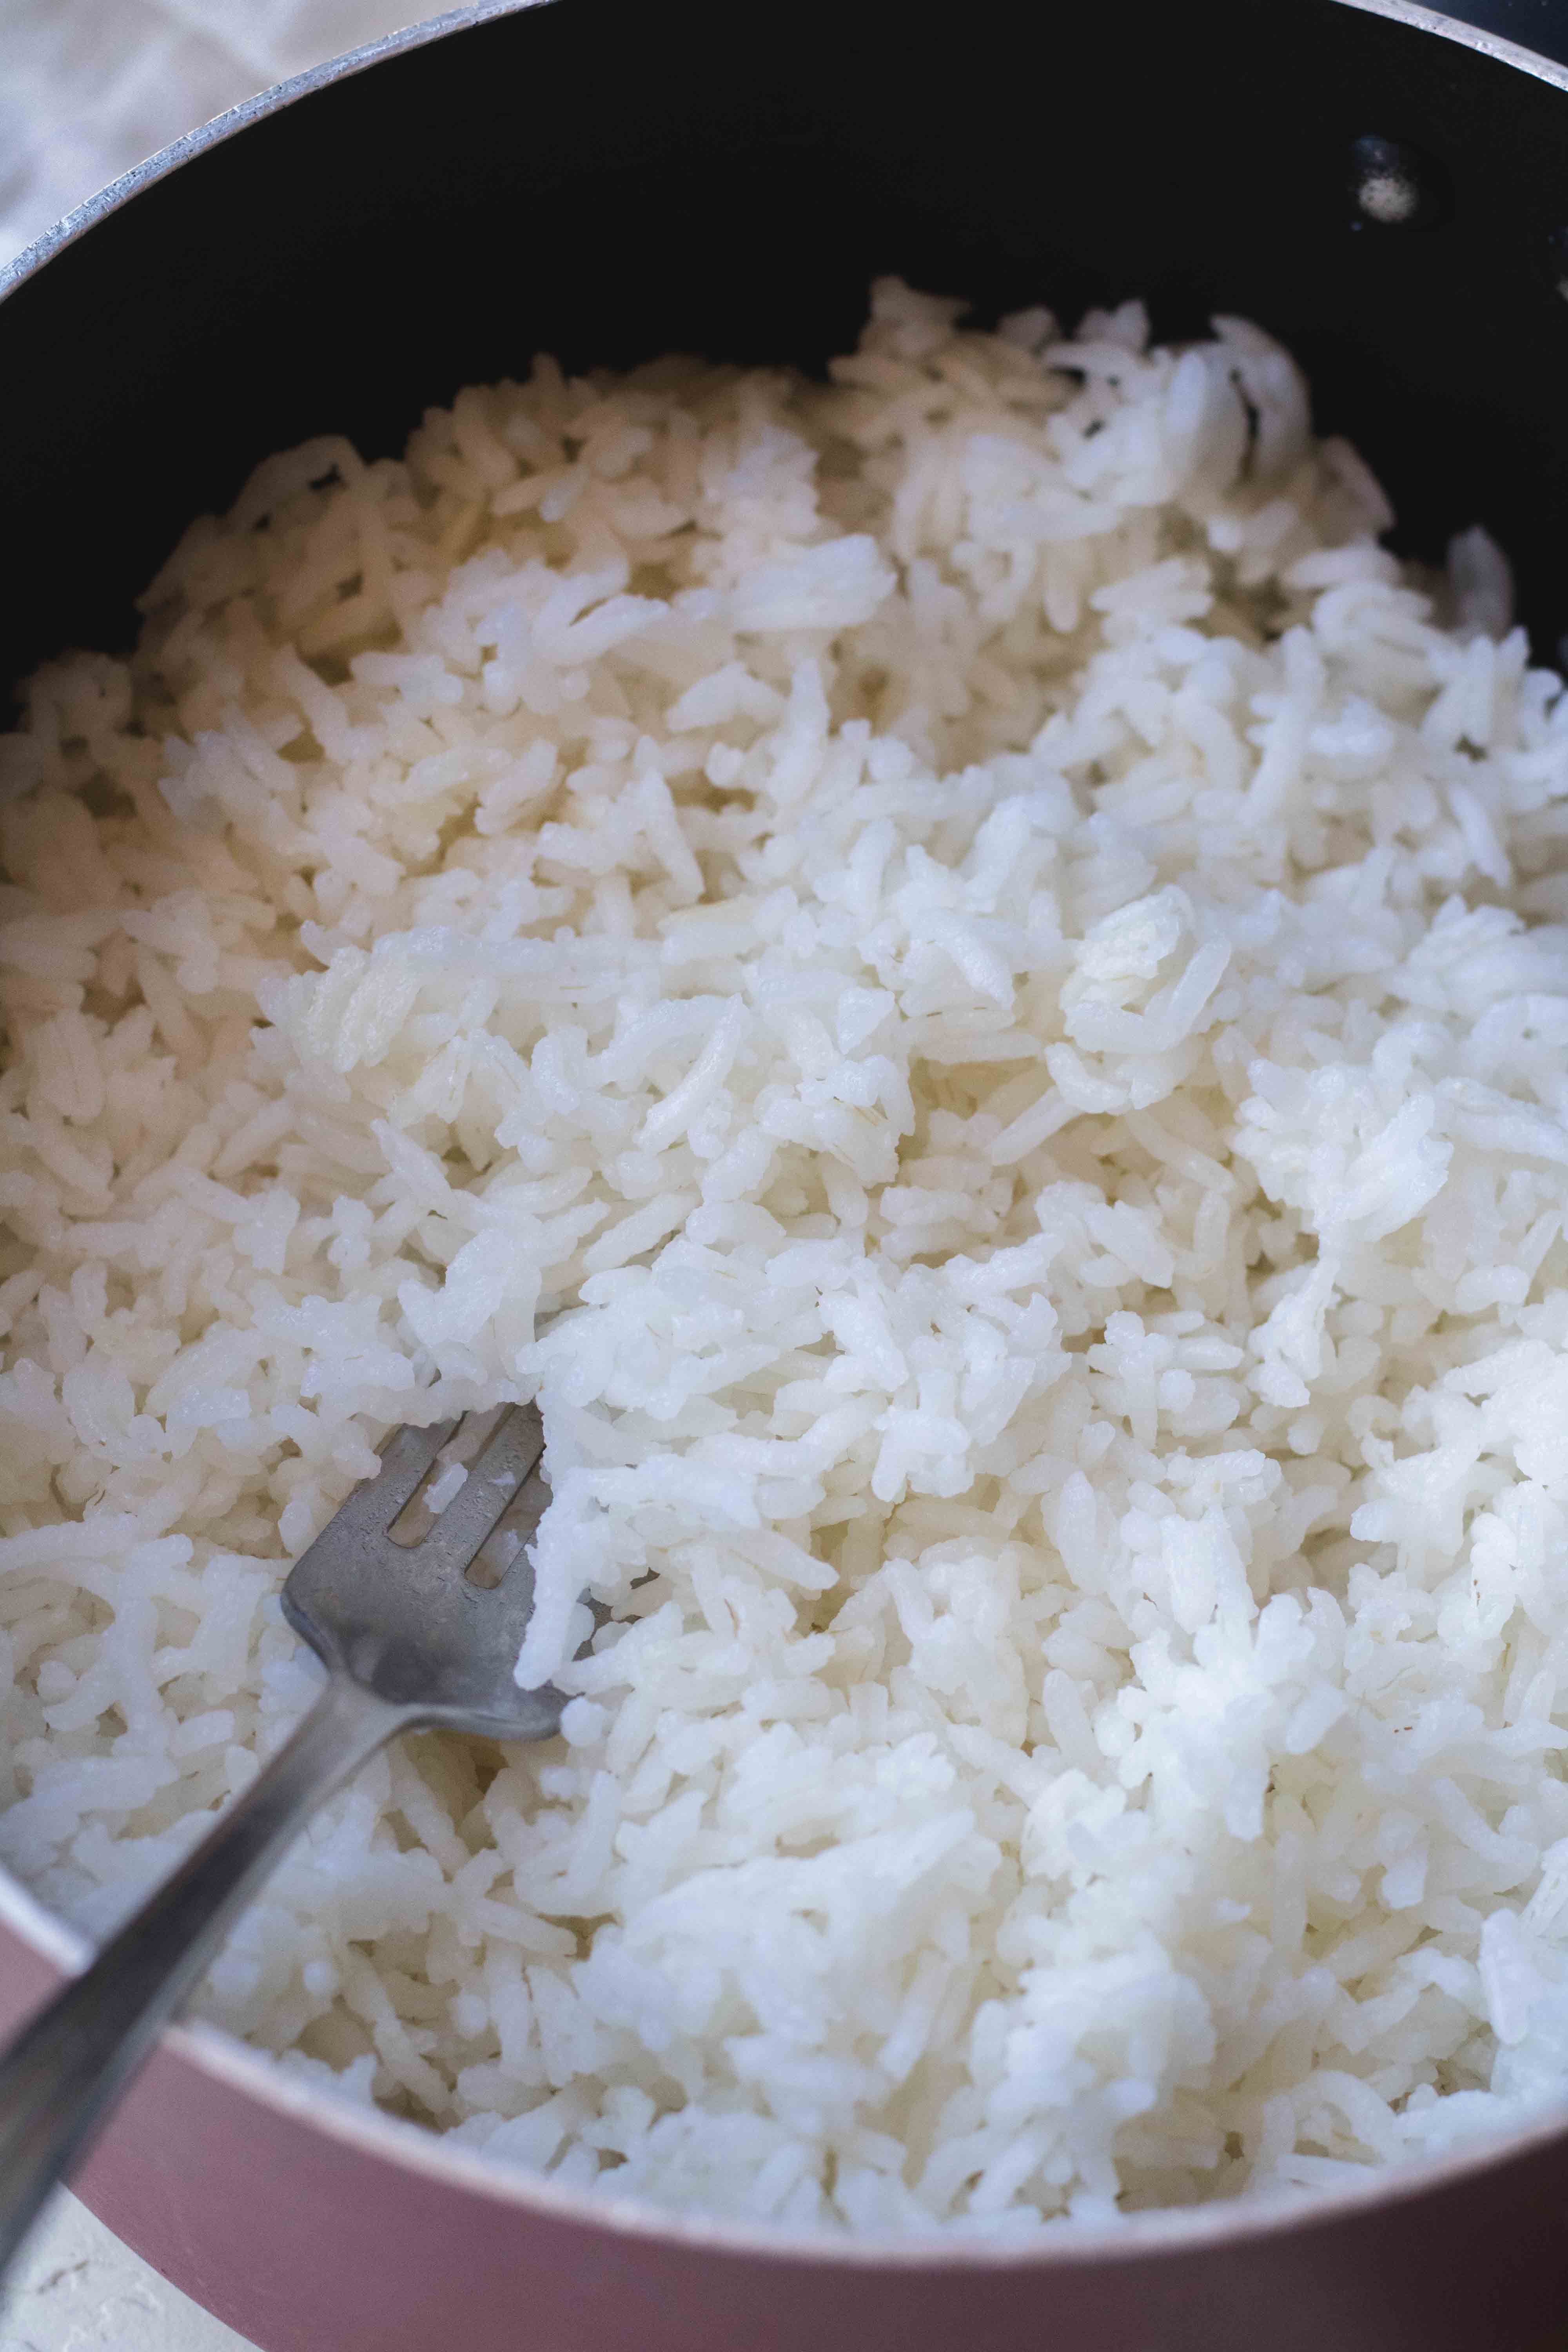 https://lifestyleofafoodie.com/wp-content/uploads/2020/04/How-to-make-the-best-white-rice-on-the-stove-top-12-of-17.jpg